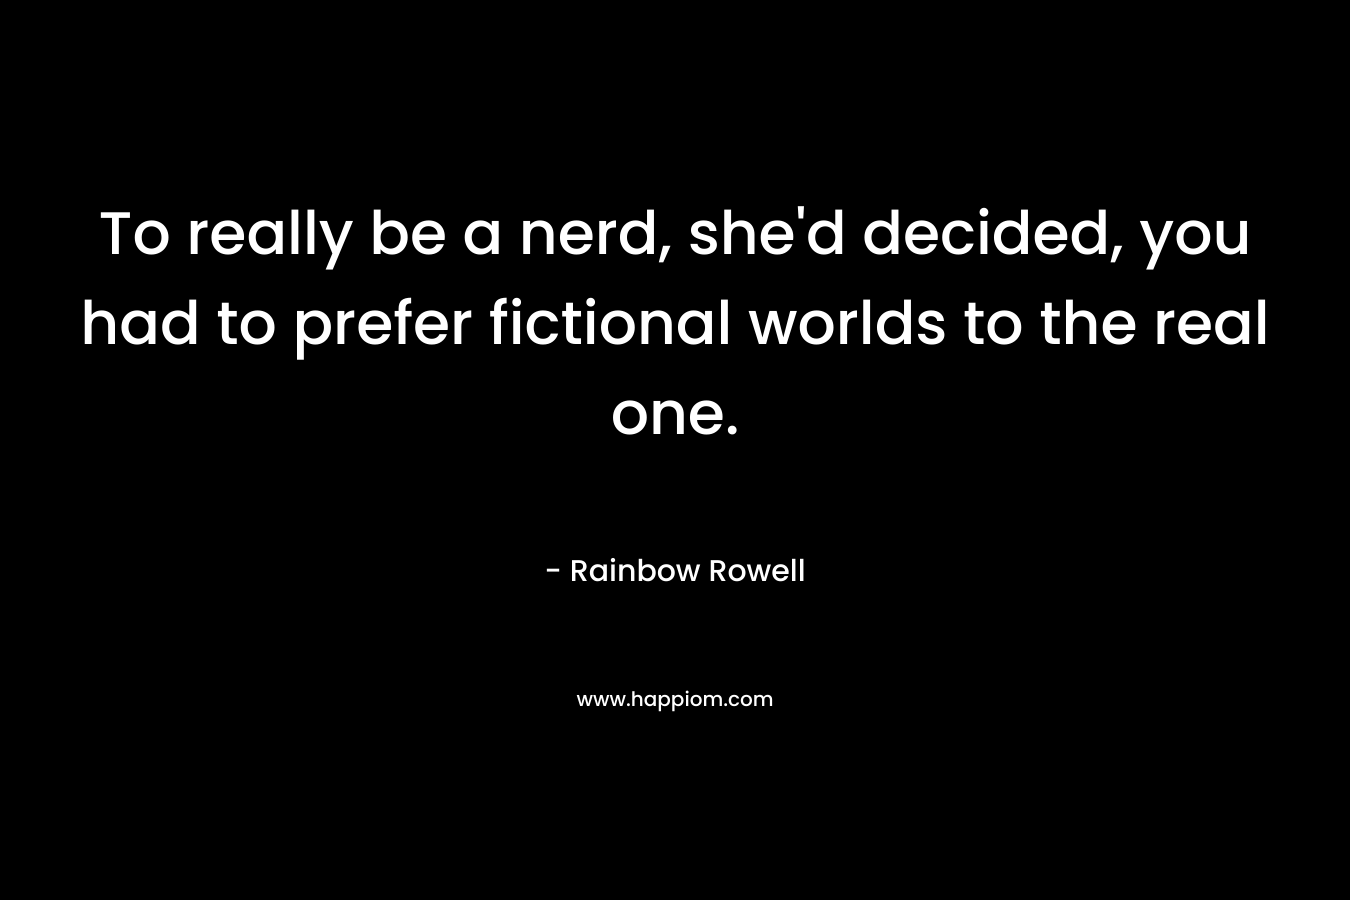 To really be a nerd, she’d decided, you had to prefer fictional worlds to the real one. – Rainbow Rowell